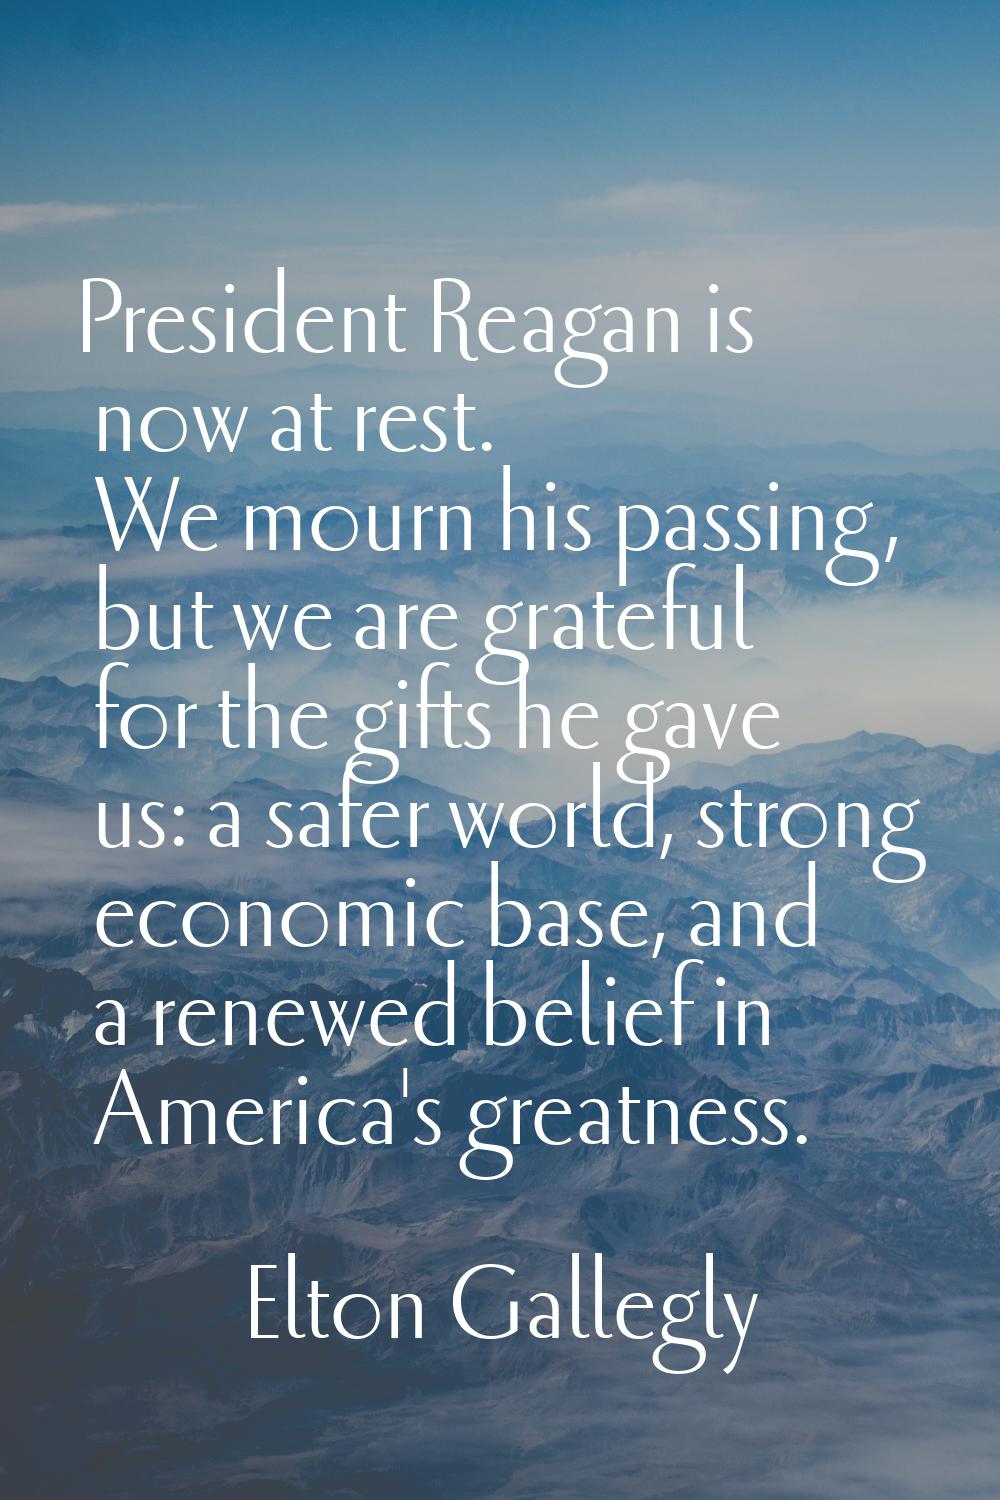 President Reagan is now at rest. We mourn his passing, but we are grateful for the gifts he gave us